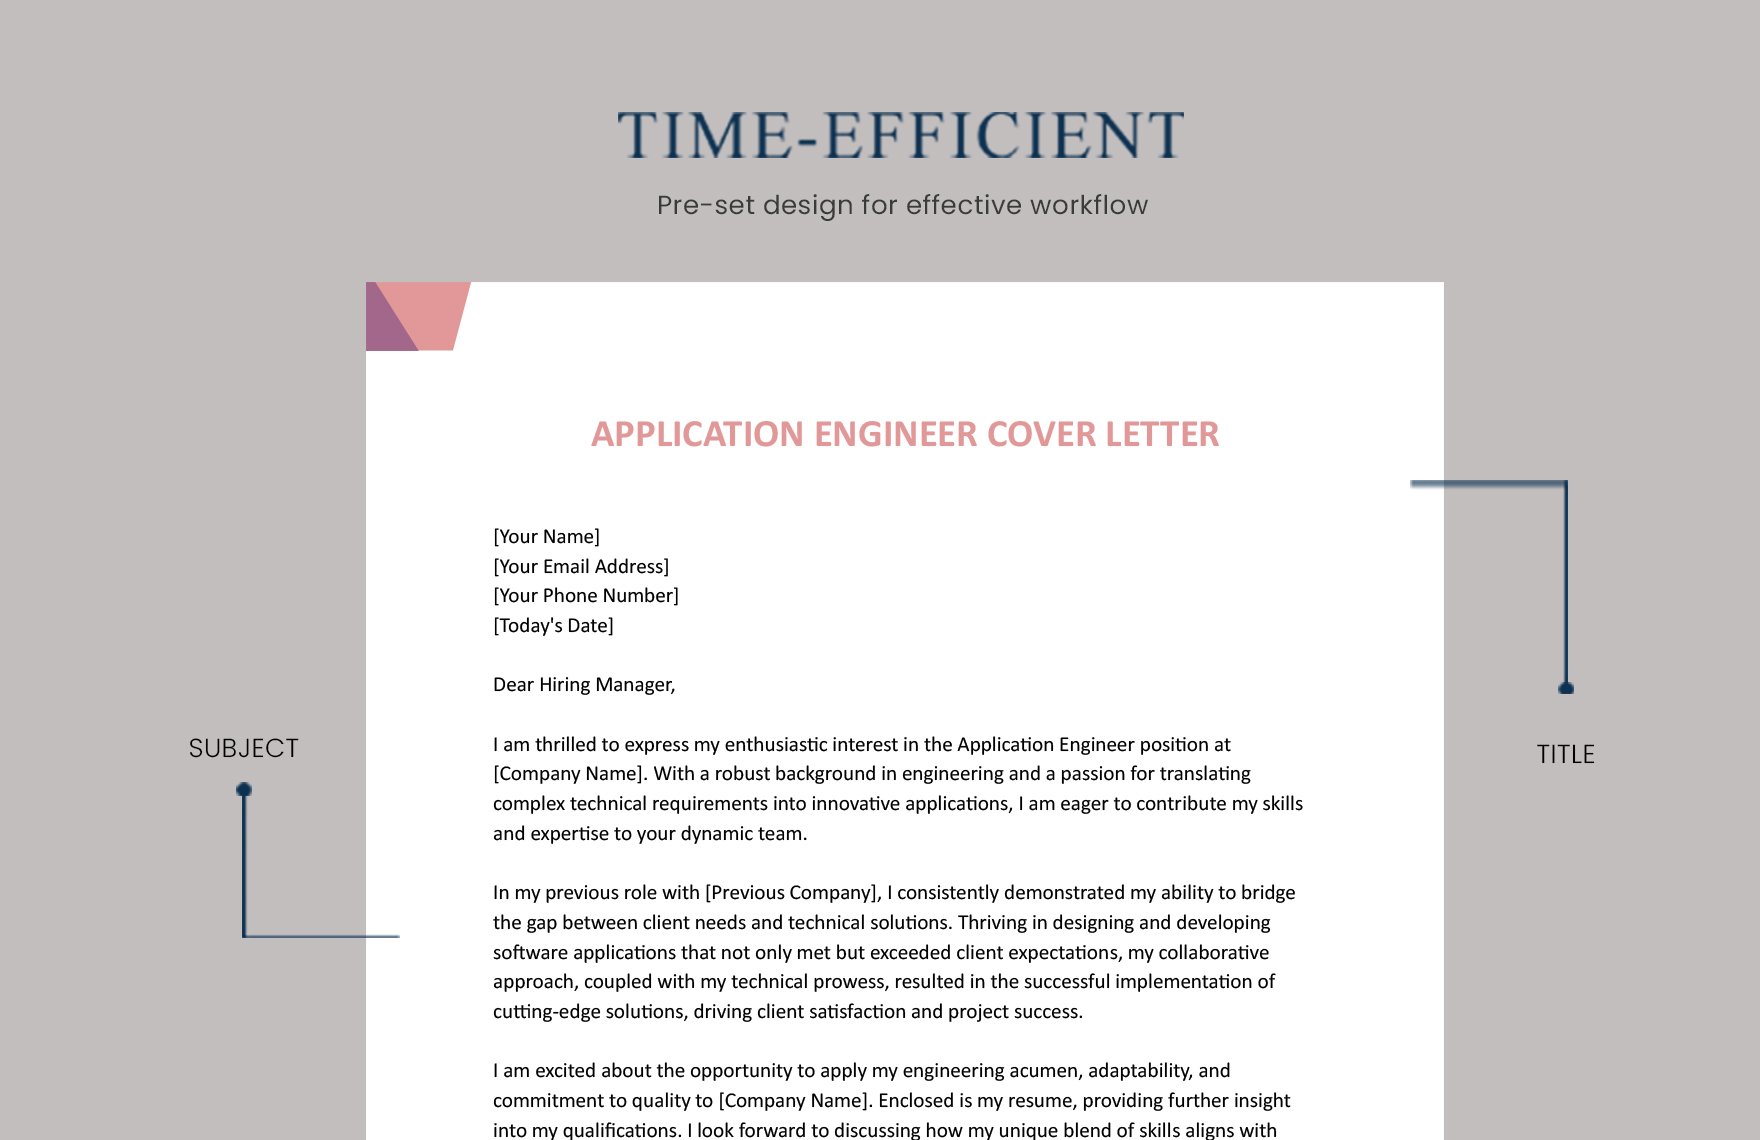 Application Engineer Cover Letter